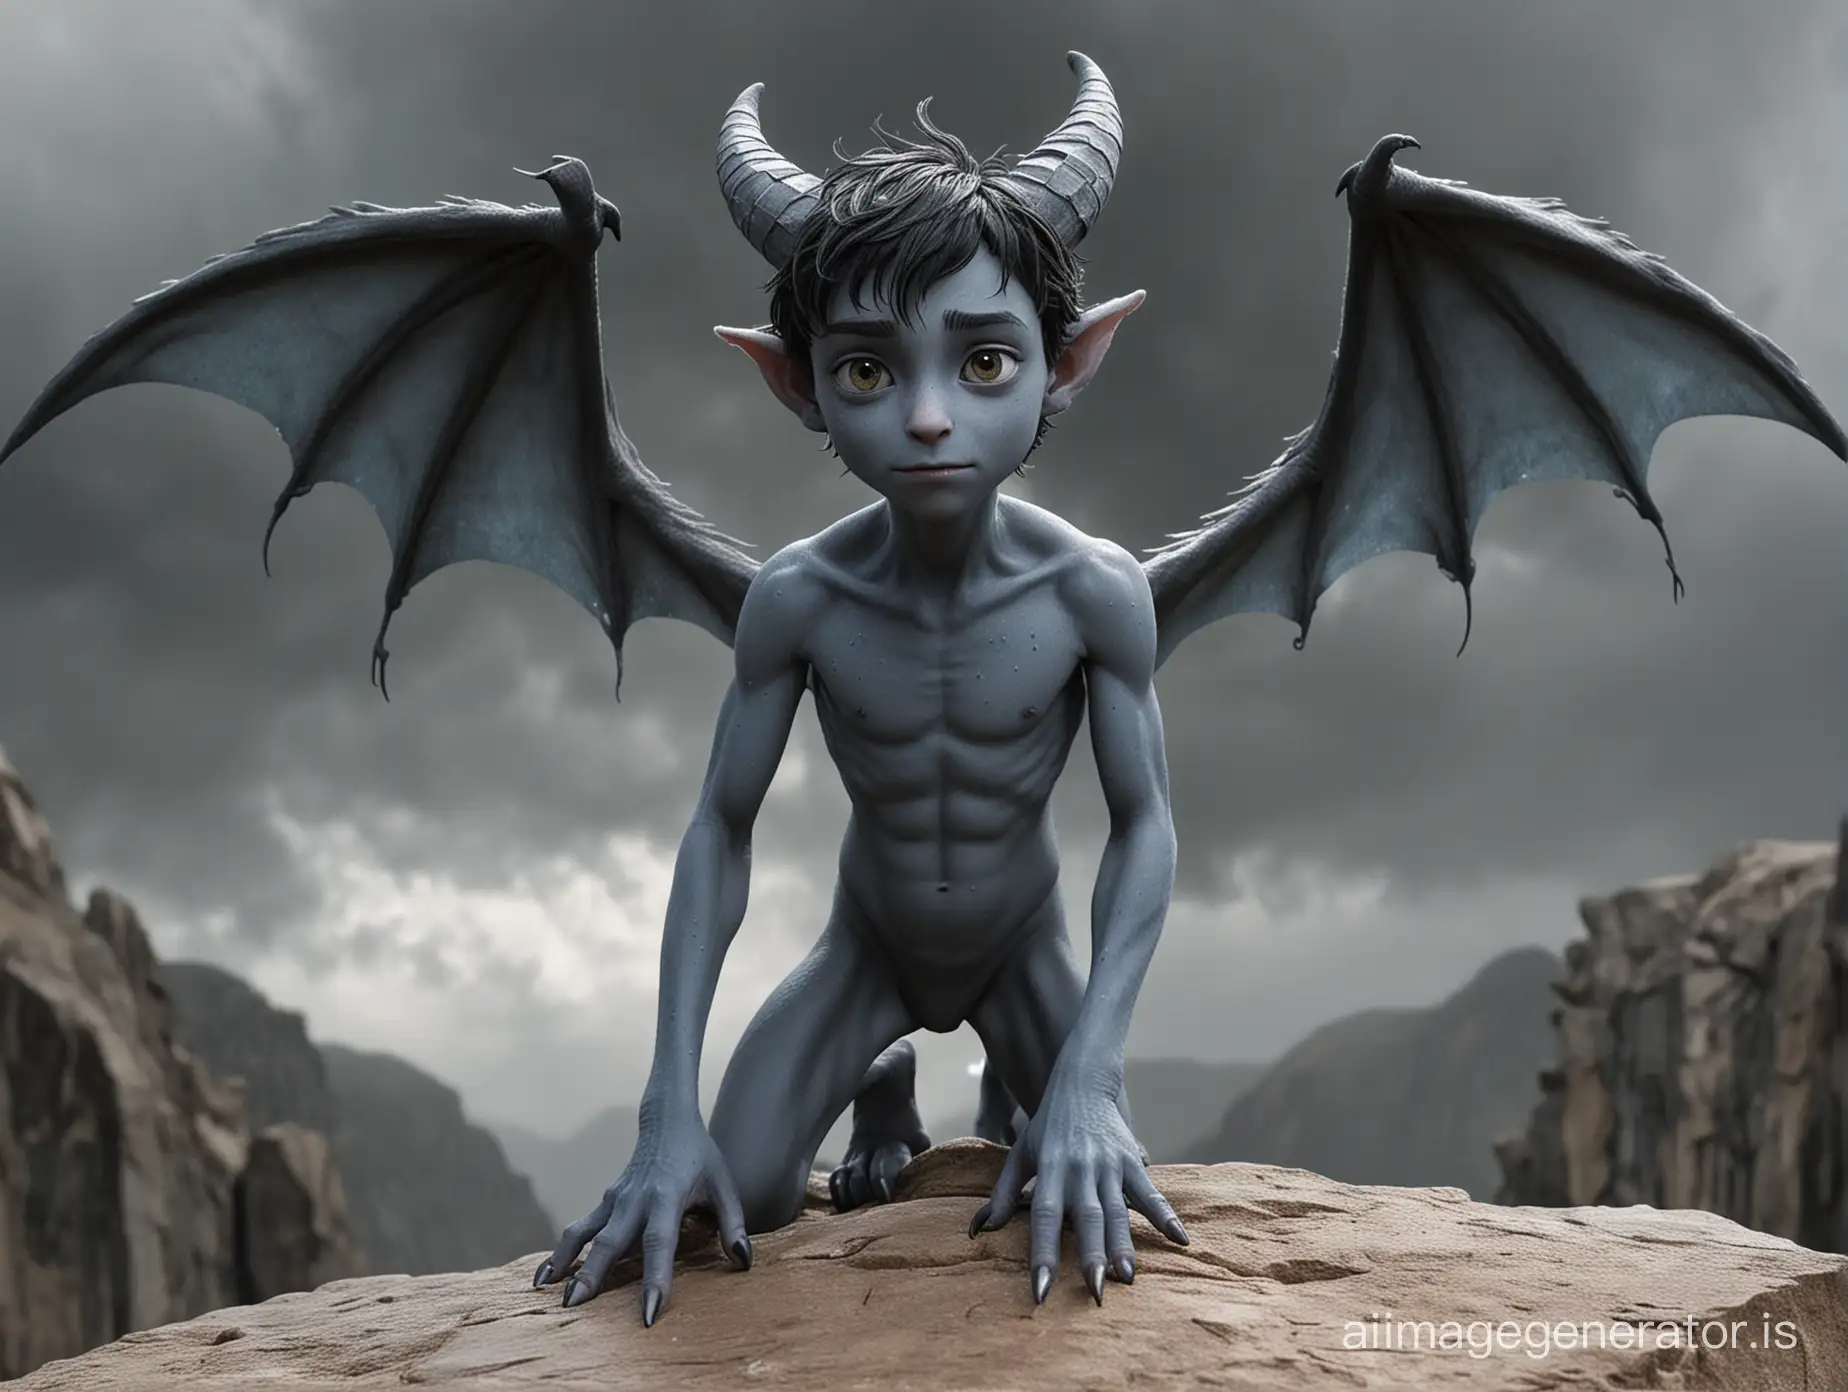 A nude Teenboy with very smooth gray-blue skin and some freckles. He has bat-like wings and a Tail. He is skinny. He has pointet ears. He has dark hair. He has claws instead of fingers and toes. He has animal-like feet. Two natural sharp horns growing from his forehead. He stands on a Rock in a dark cloudy Night like a Gargoyle. Show the entire boy in a long shot.